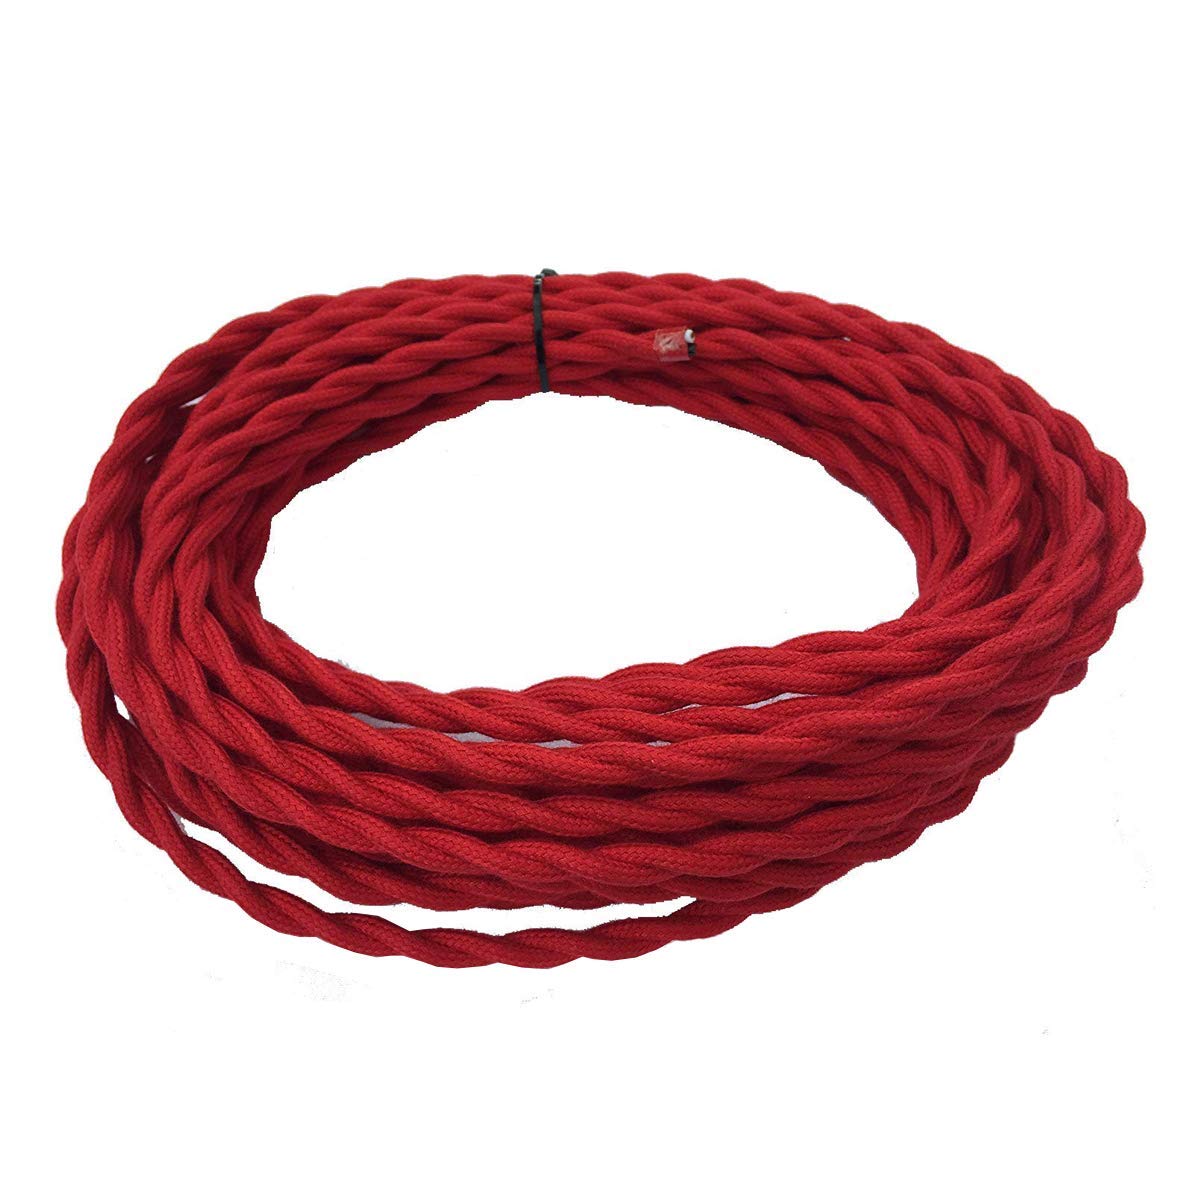 33' Retro Style Weave Rope Open Wires Antique Industrial Electrical Cord-Red